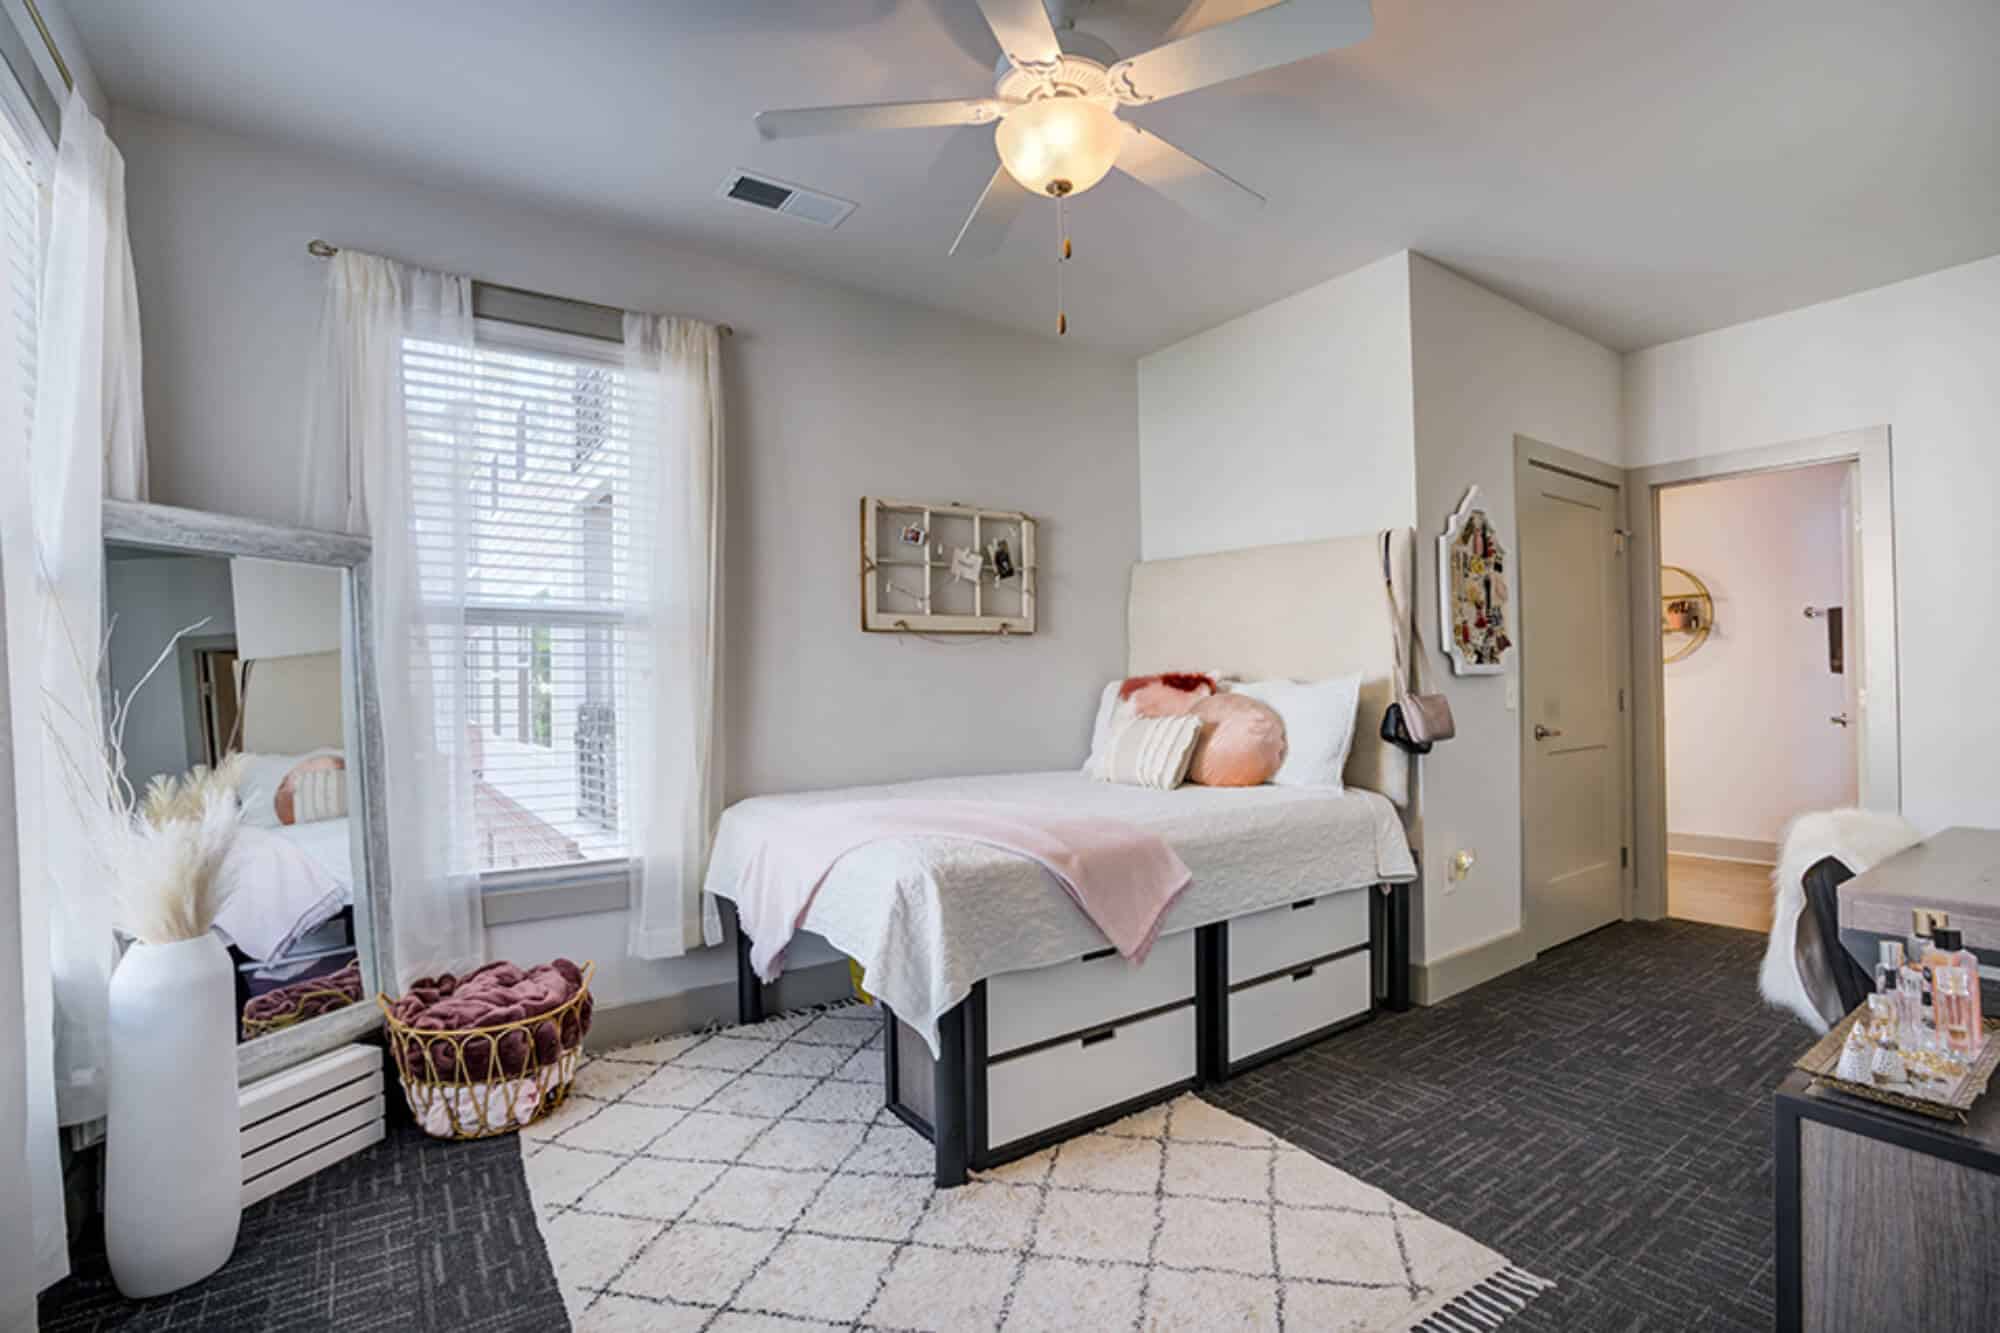 centennial off campus apartments near nc state private furnished bedrooms